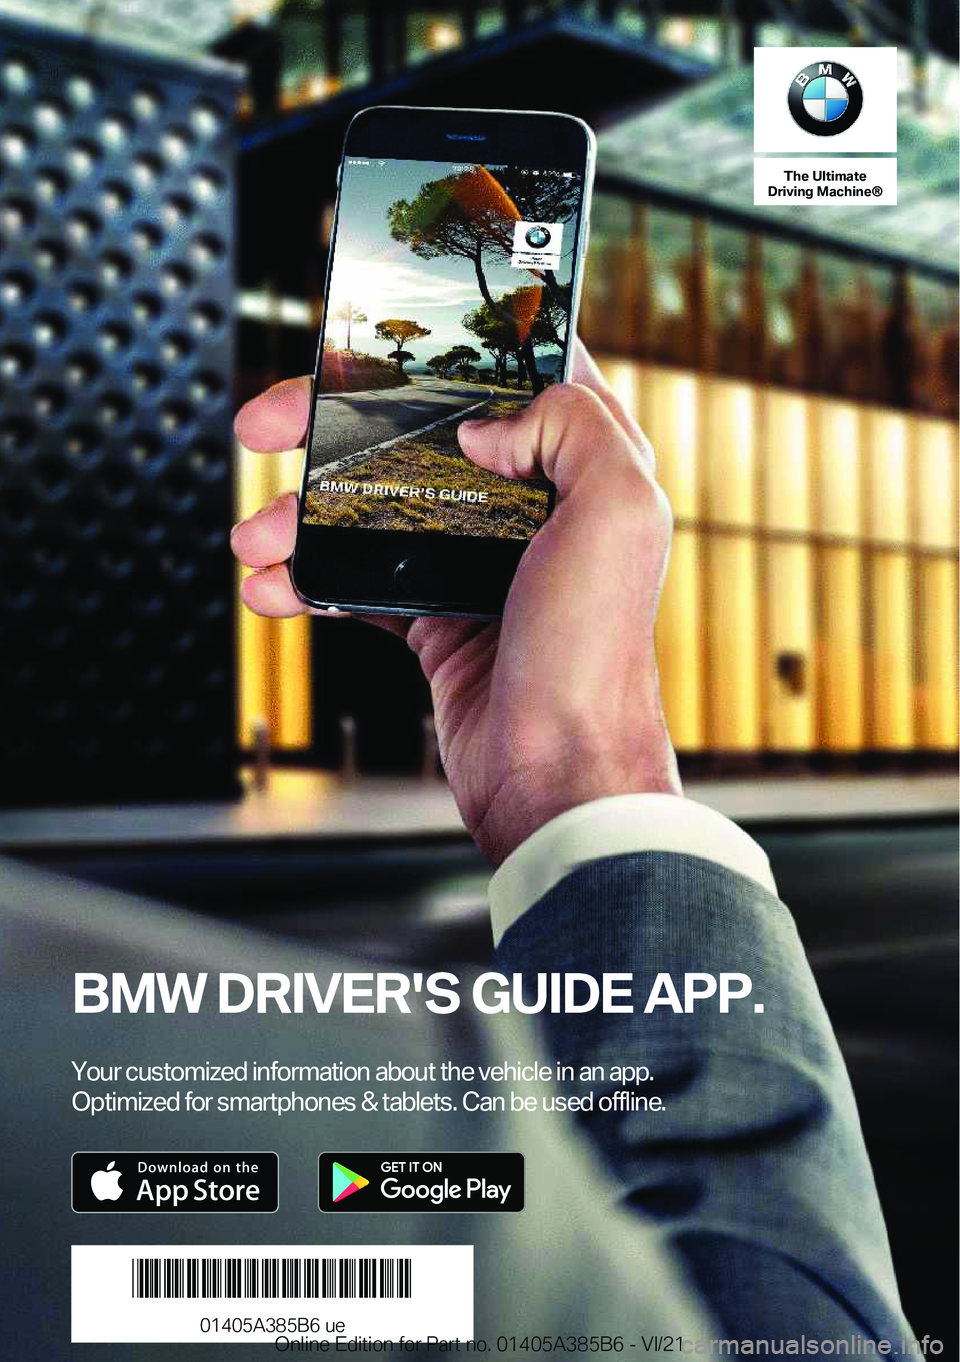 BMW X7 2022  Owners Manual �T�h�e��U�l�t�i�m�a�t�e
�D�r�i�v�i�n�g��M�a�c�h�i�n�e�n
�B�M�W��D�R�I�V�E�R�'�S��G�U�I�D�E��A�P�P�.
�Y�o�u�r��c�u�s�t�o�m�i�z�e�d��i�n�f�o�r�m�a�t�i�o�n��a�b�o�u�t��t�h�e��v�e�h�i�c�l�e�